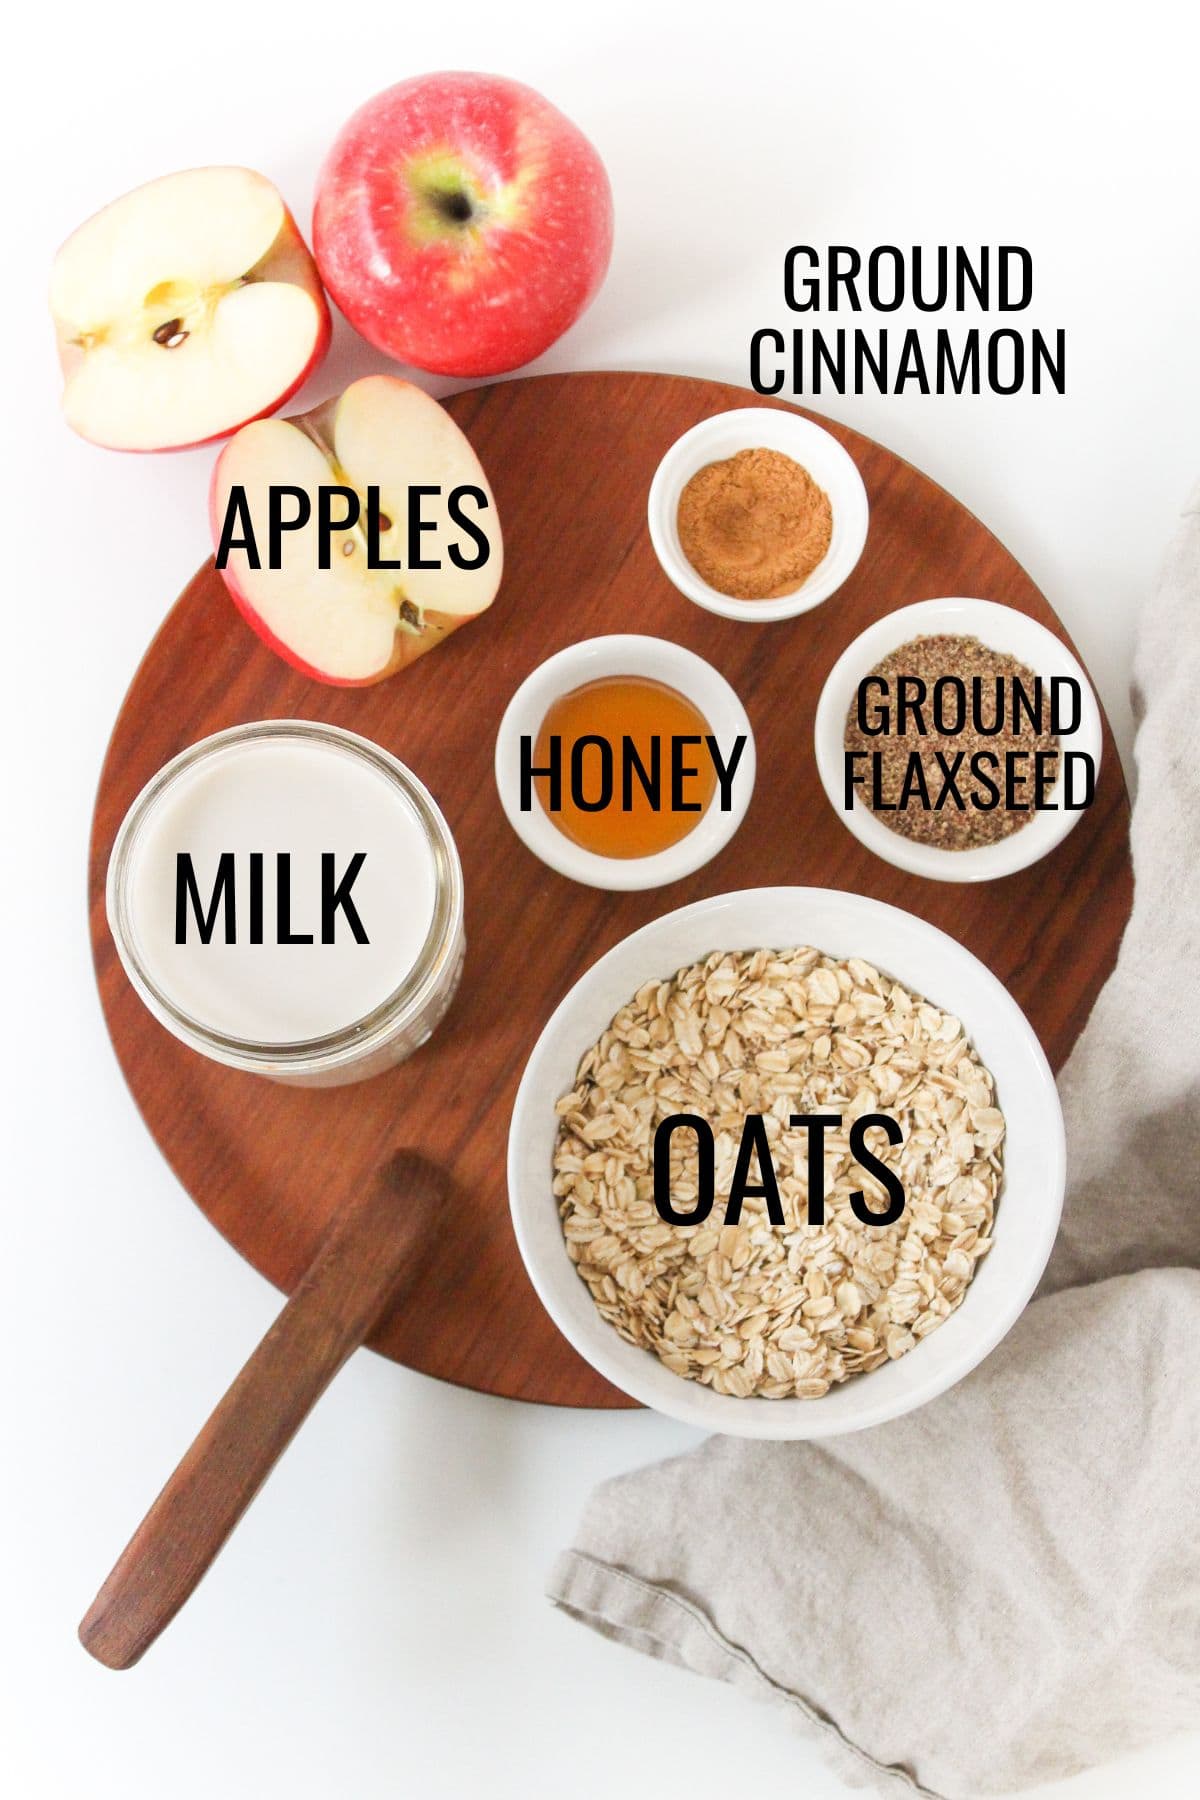 Apple cinnamon oatmeal ingredients in small bowls